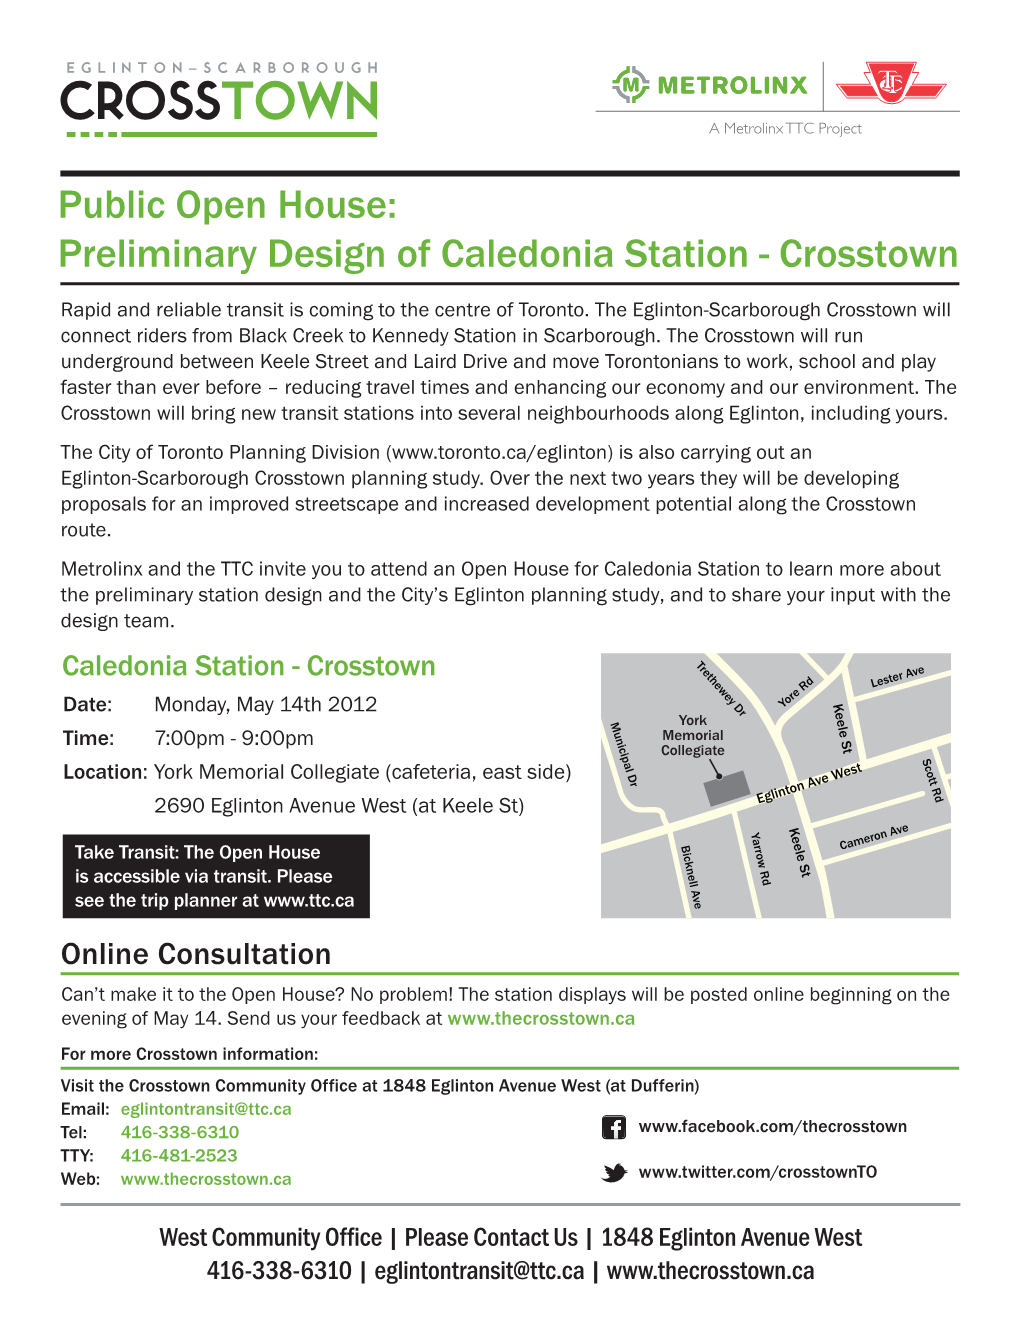 Public Open House: Preliminary Design of Caledonia Station - Crosstown